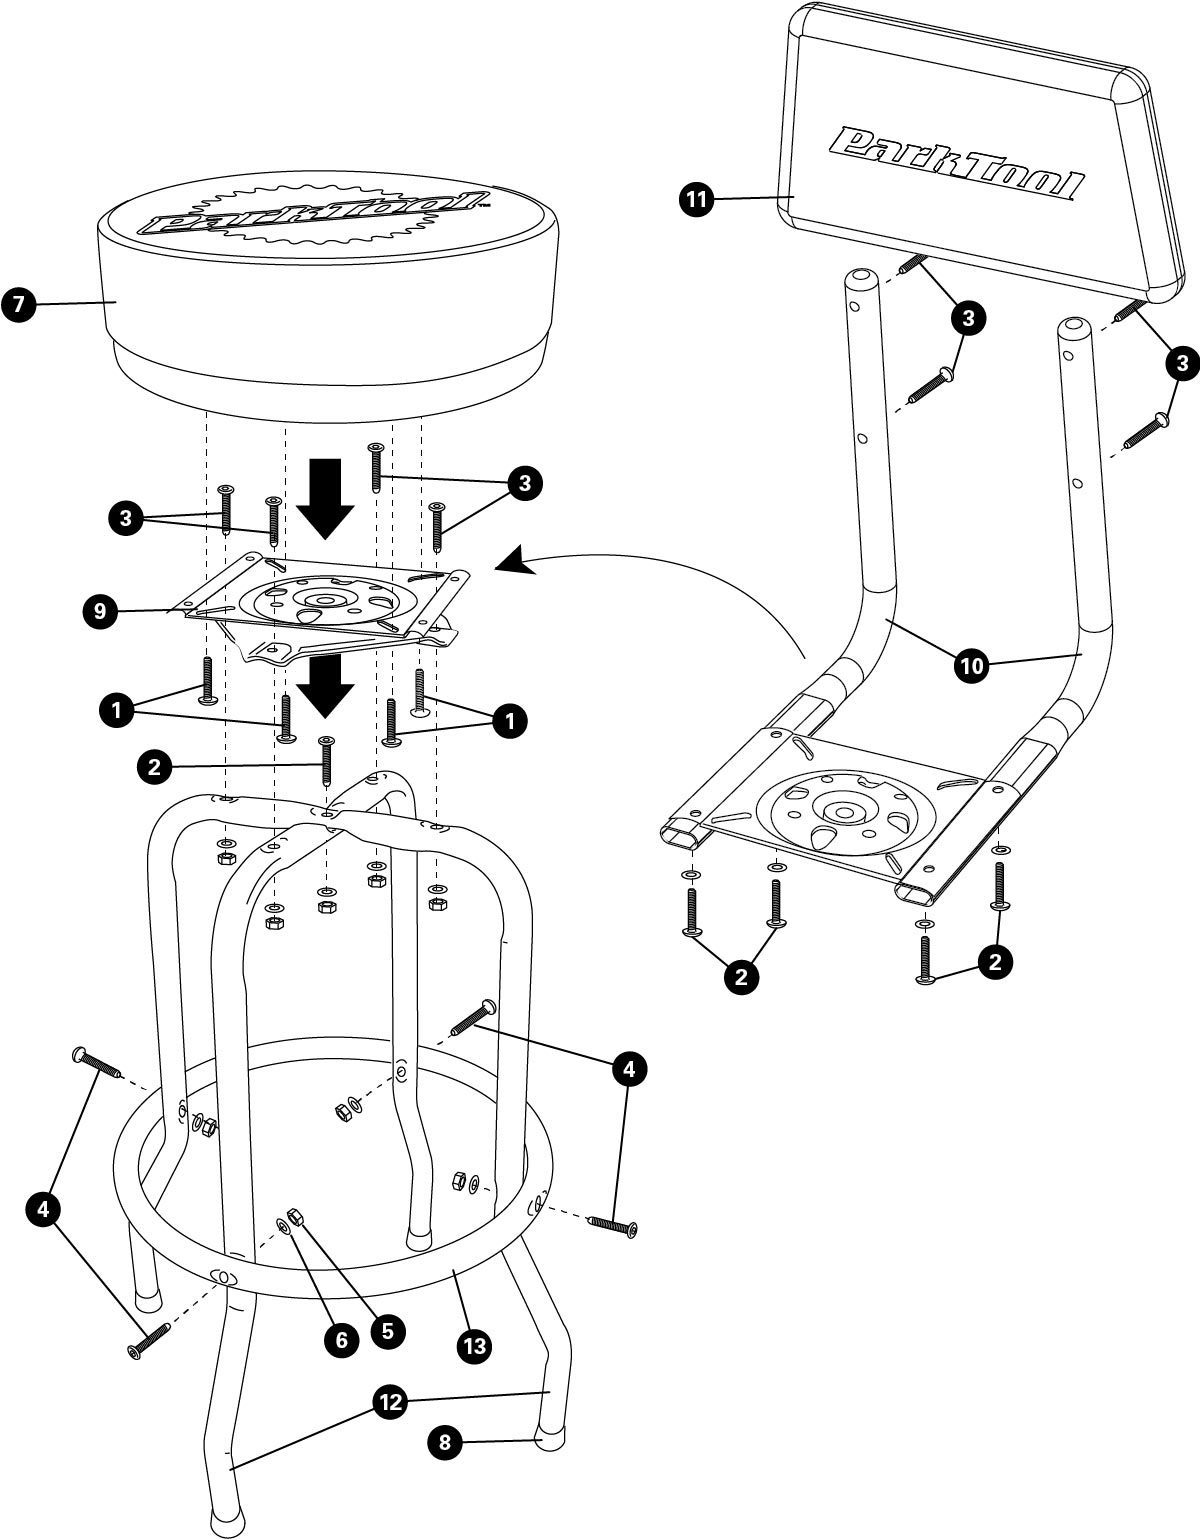 Parts diagram for STL-3 Shop Stool with Backrest, click to enlarge